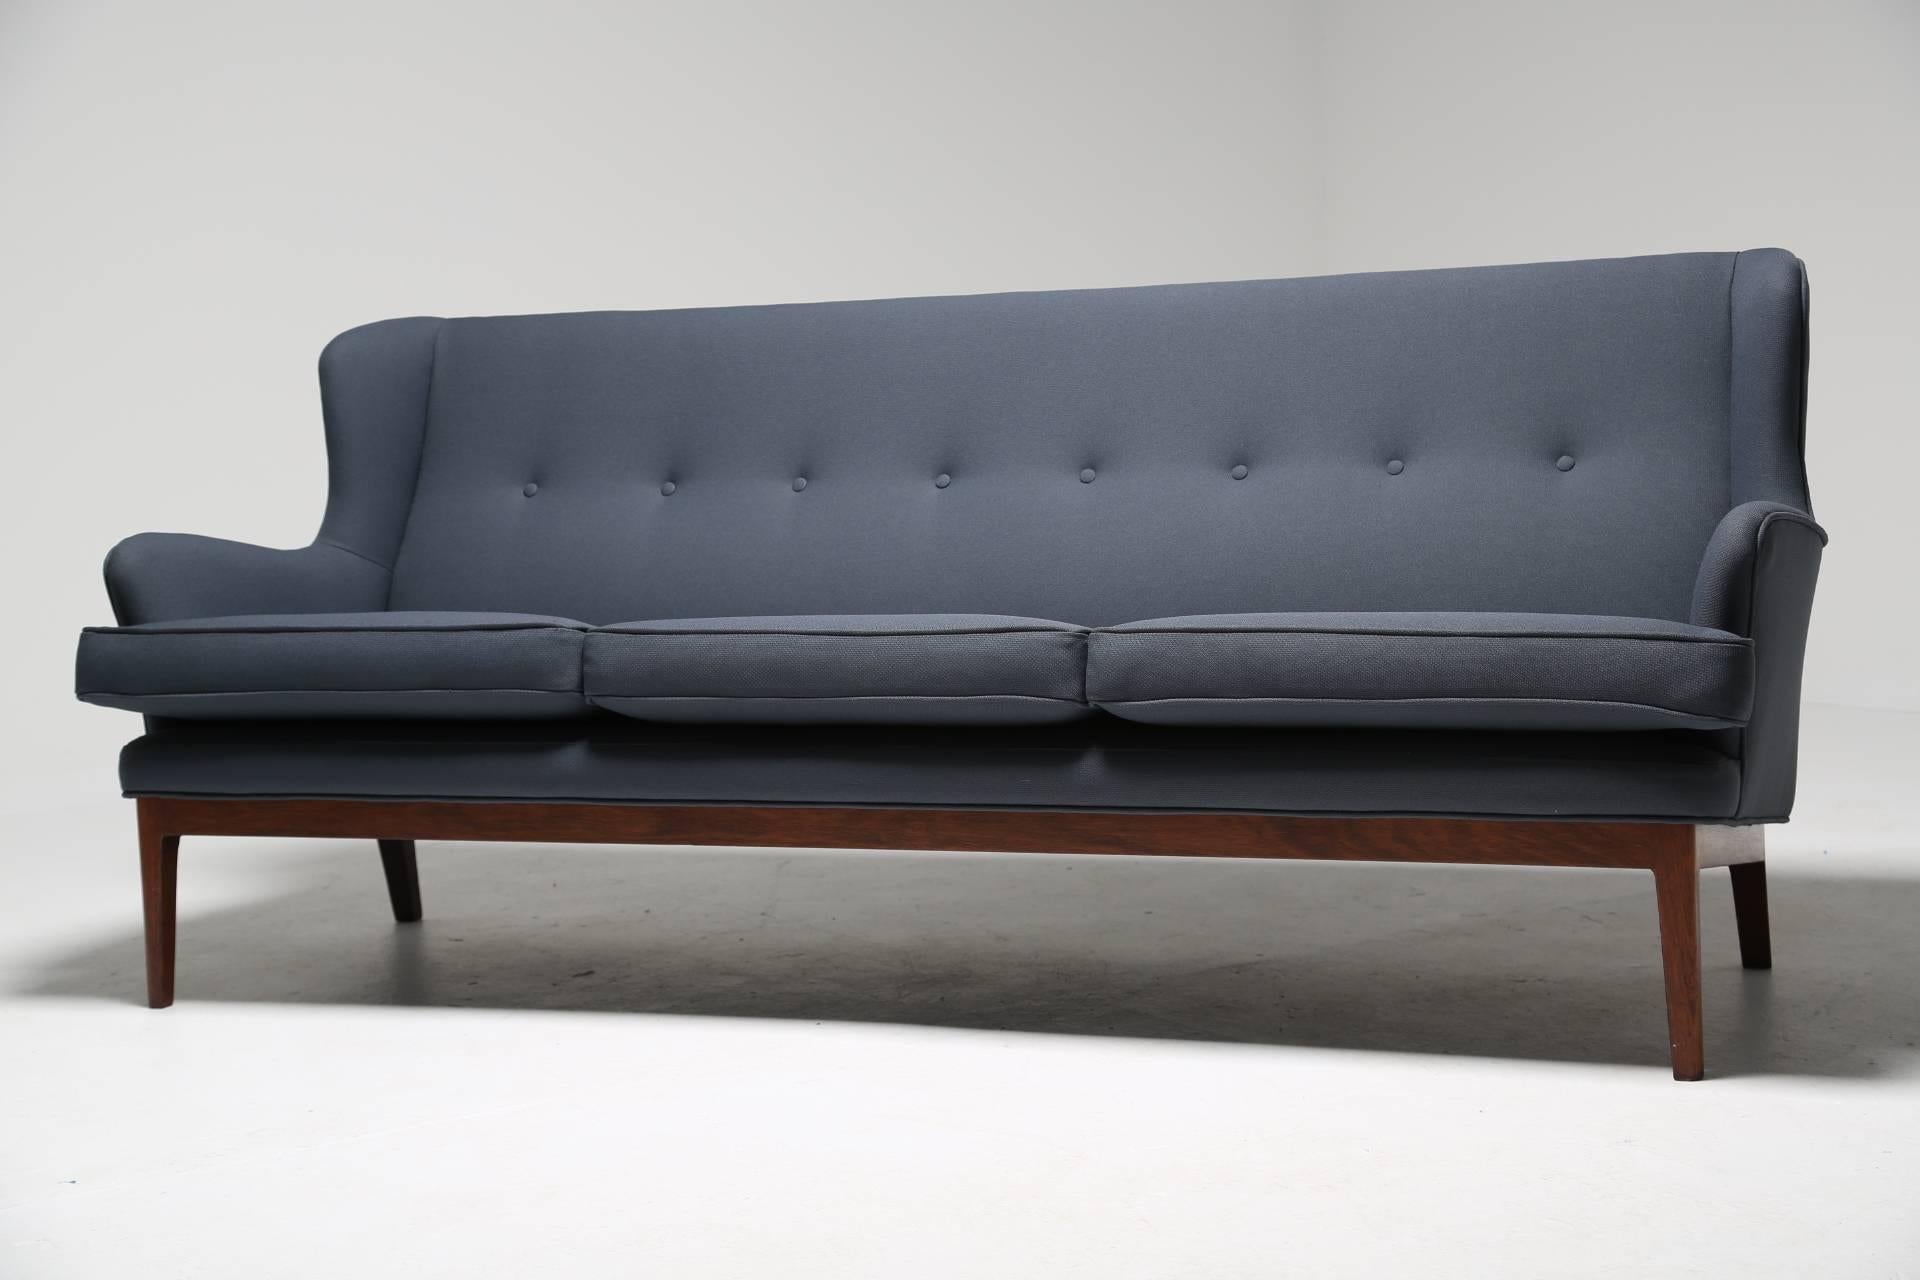 A Mid-Century Scandinavian modern winged sofa with tropical hardwood frame by Arne Norell. The sofa has been recovered in an original Danish fabric that would have been found on sofas of this period. A very comfortable sofa. We have a similar winged